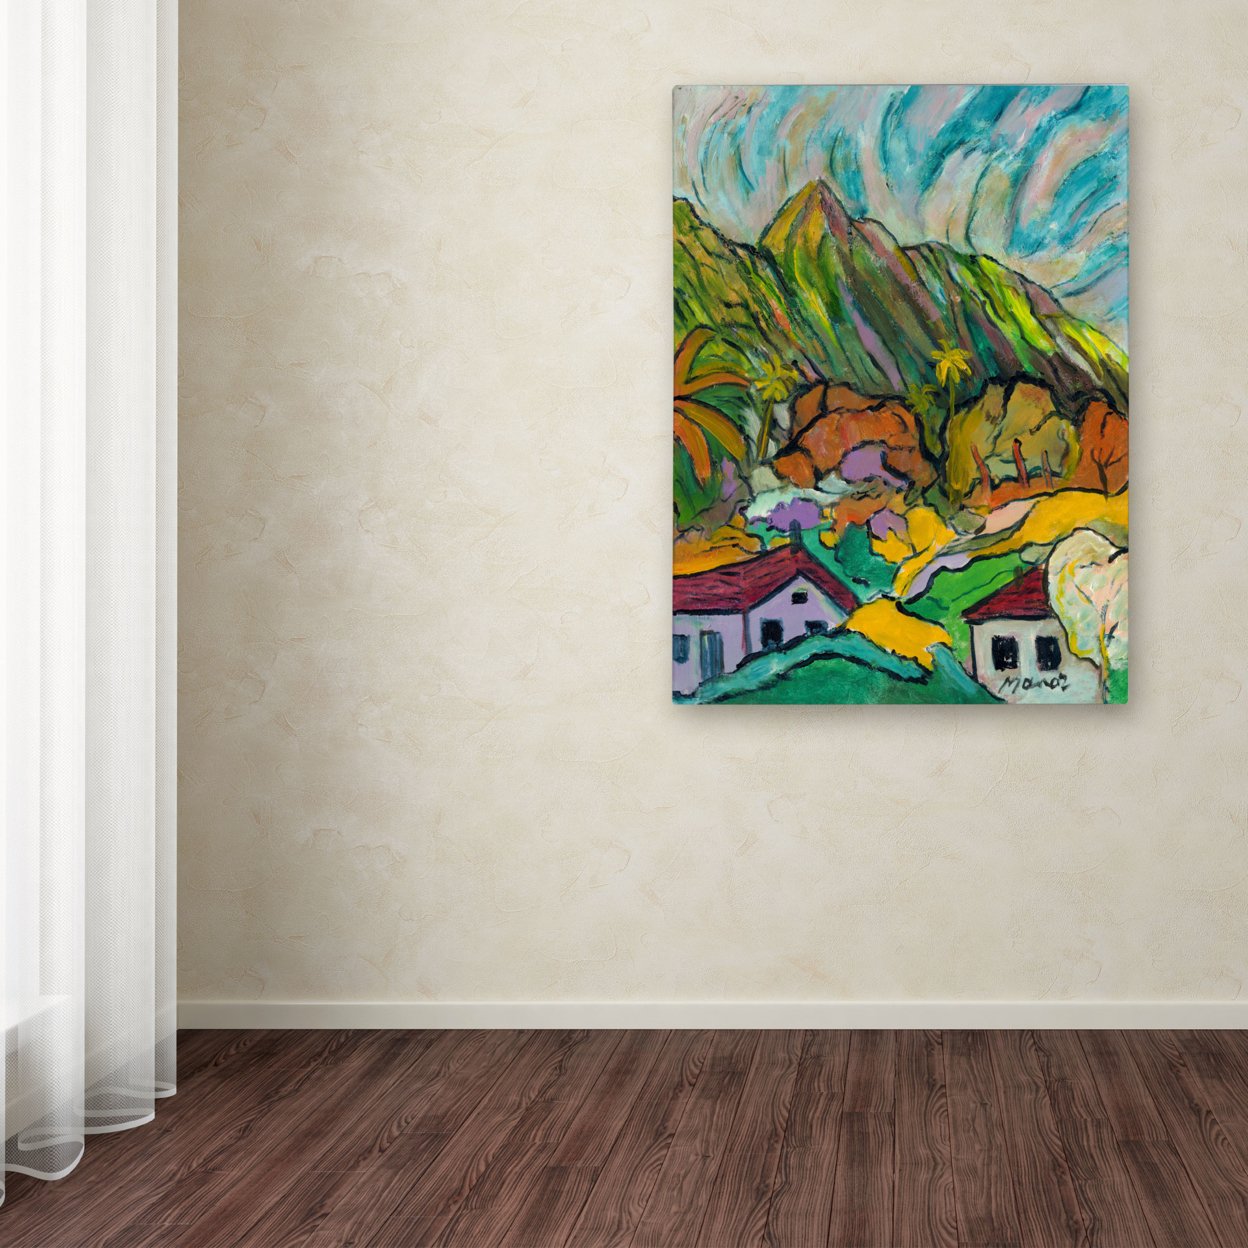 Manor Shadian 'Maui Peaks' Canvas Wall Art 35 X 47 Inches